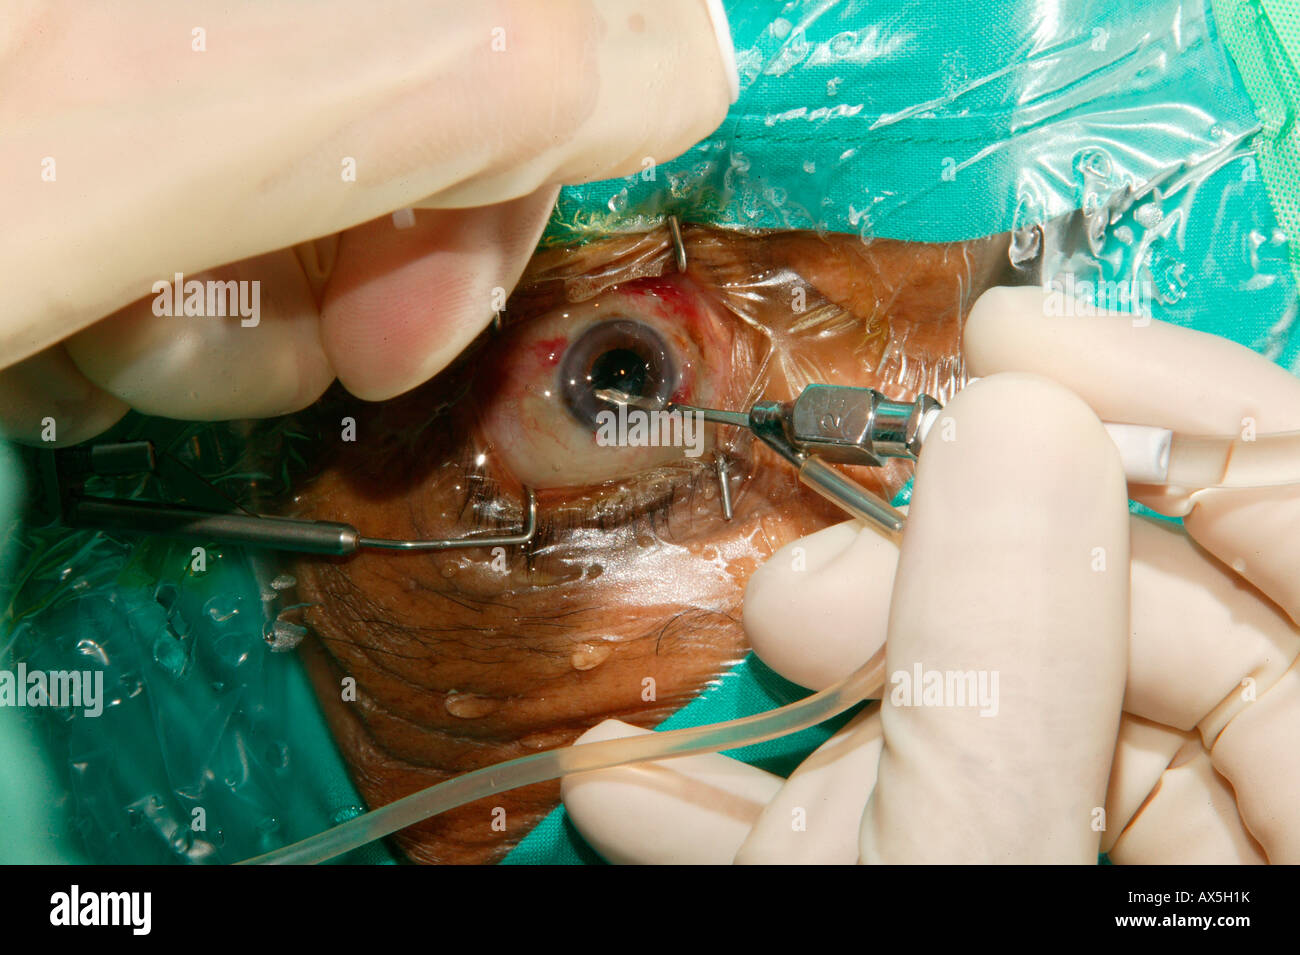 Cataract surgery performed in an operating room in Pietermaritzburg, South Africa, Africa Stock Photo